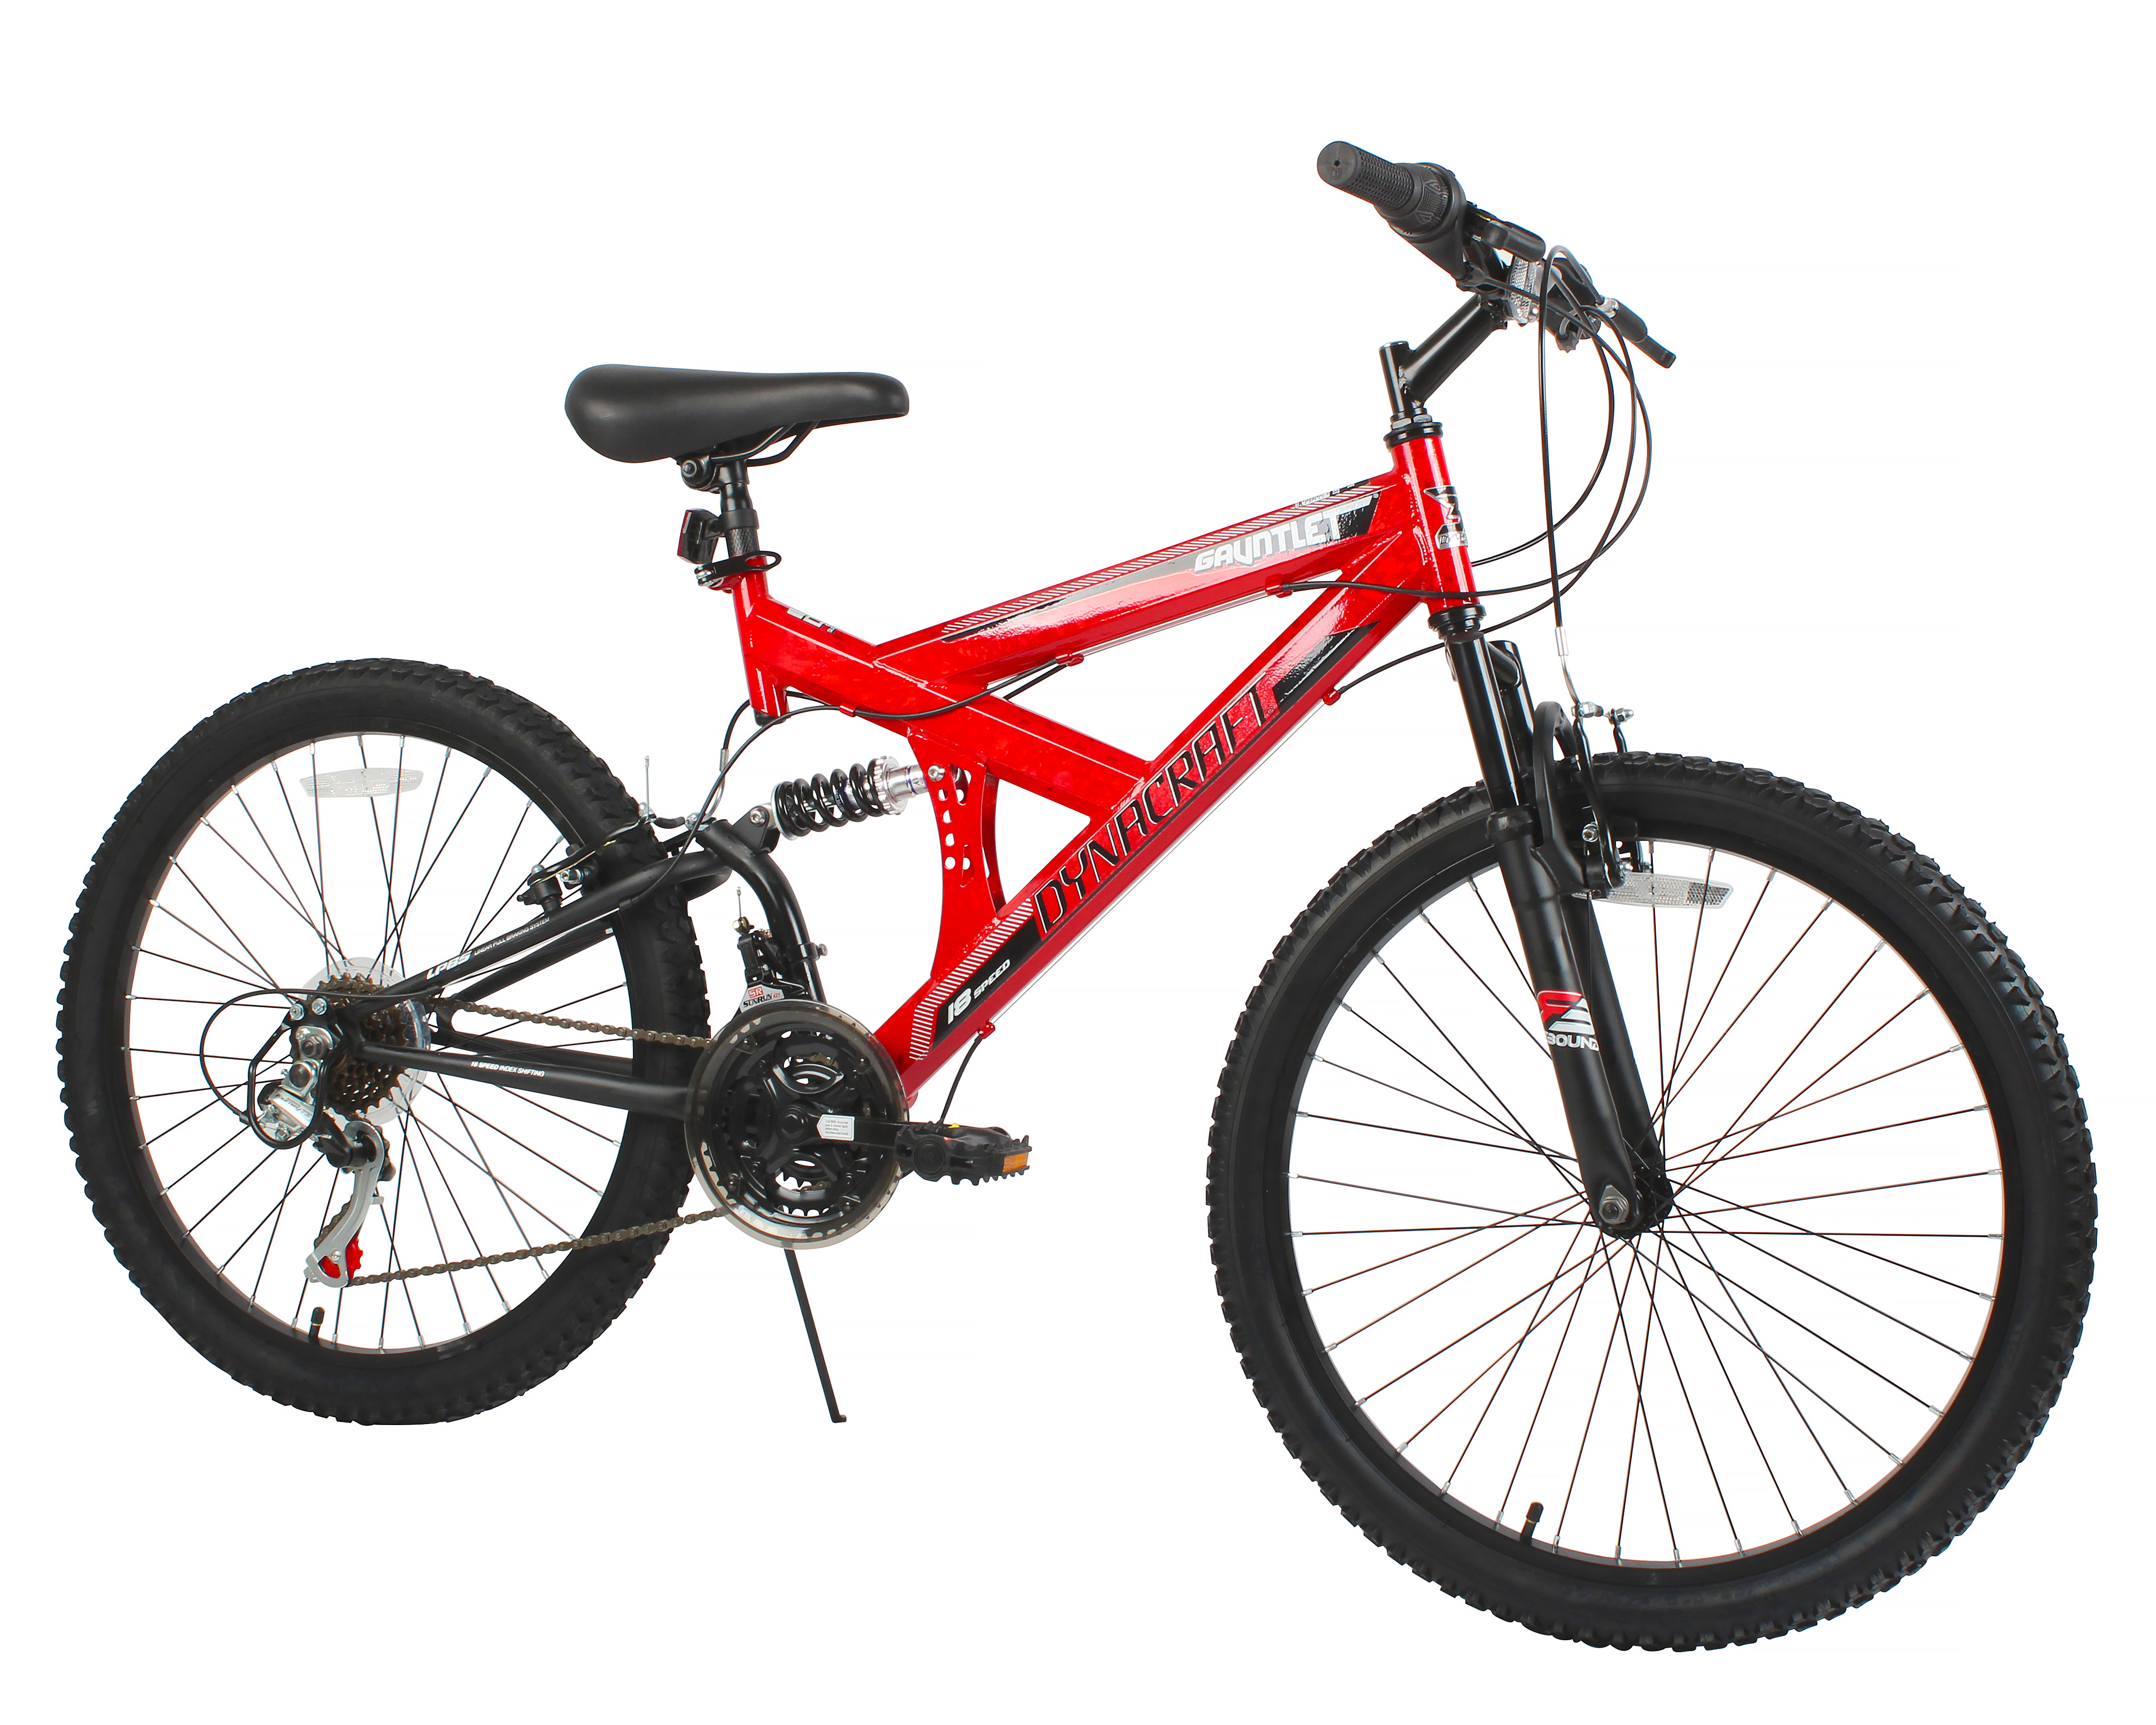 Mountain Adul DX Bicycle Bike k Suspension Boys and Girl Variable Speed ock Absorption High Carbon Steel Frame High Hardness Off Road Dual Disc Brakes 24 Inches